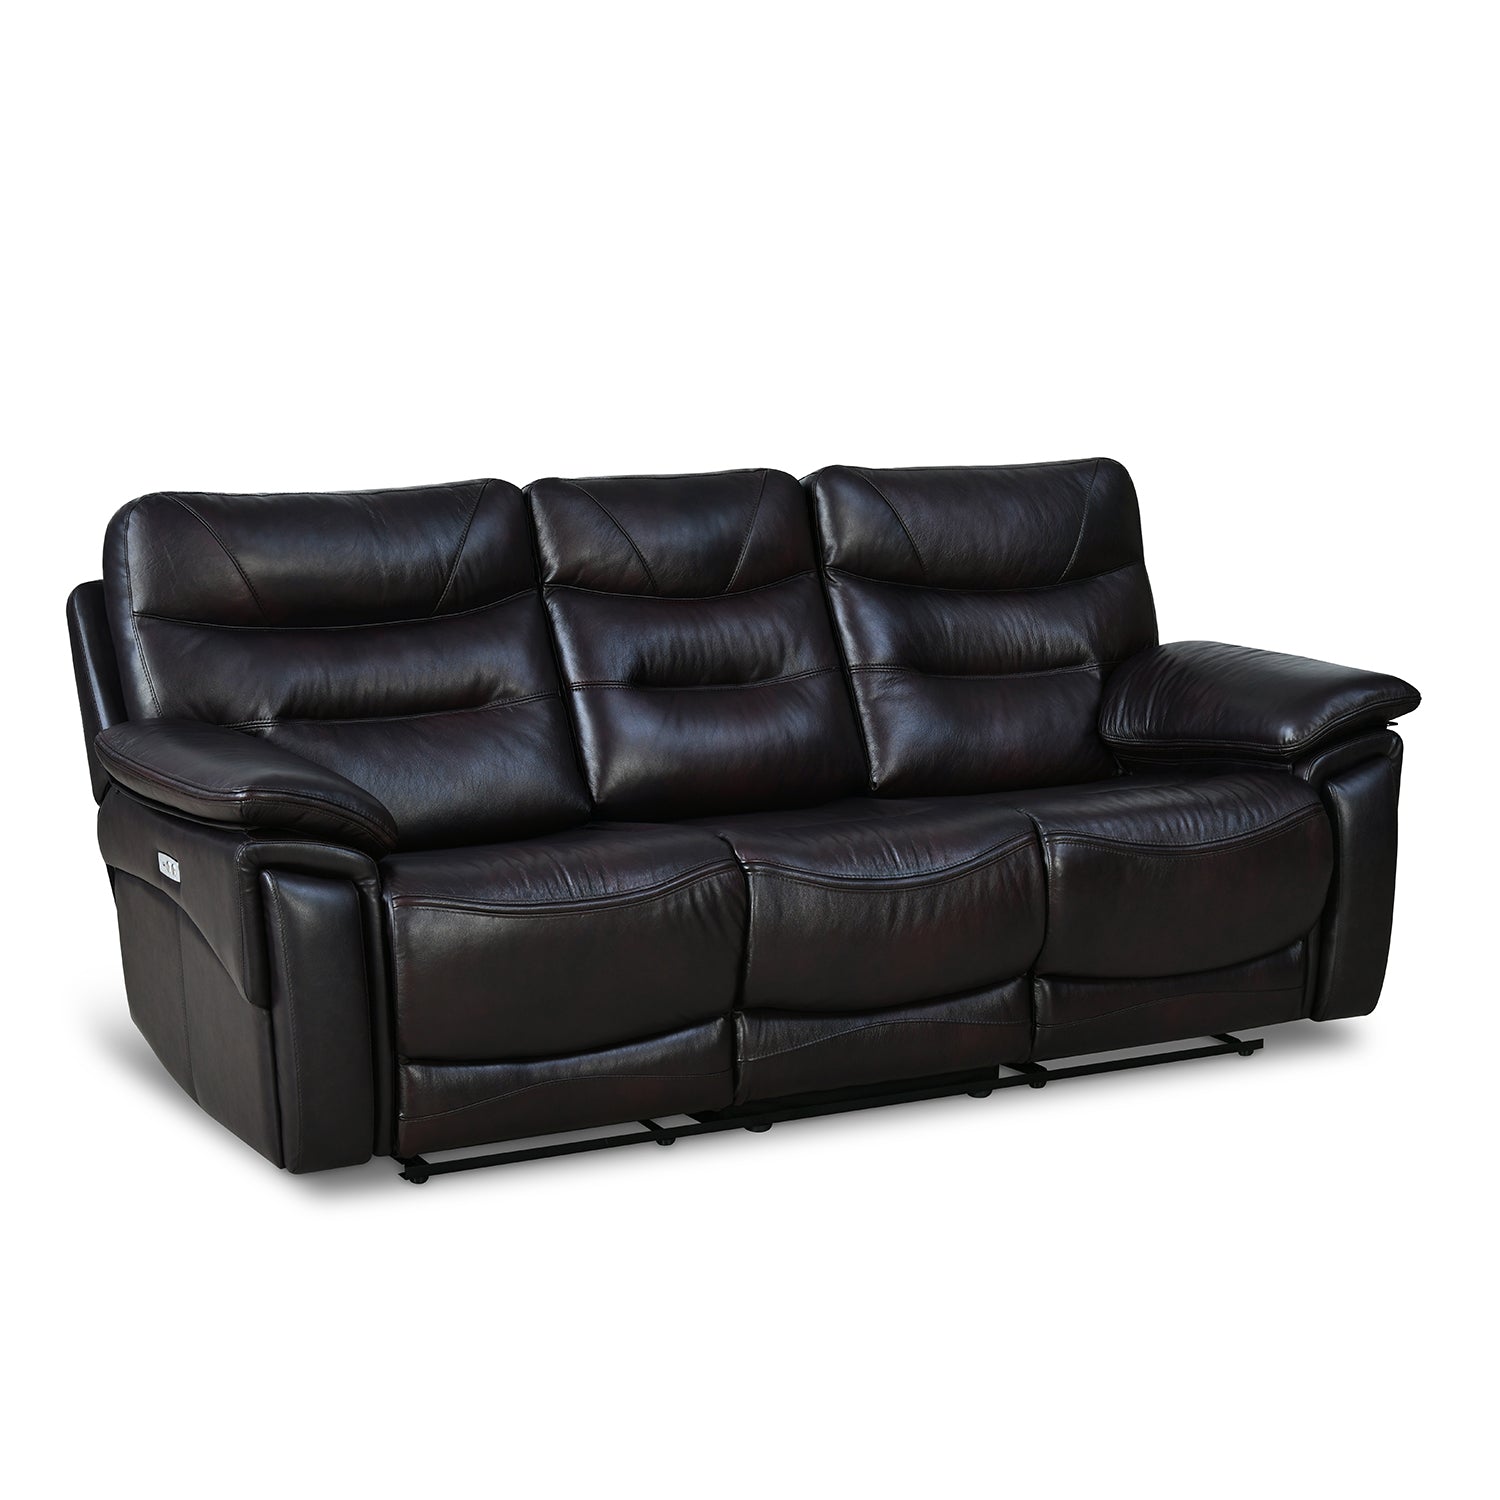 Bakewell 3 Seater Leather Powered Recliner (Brown)